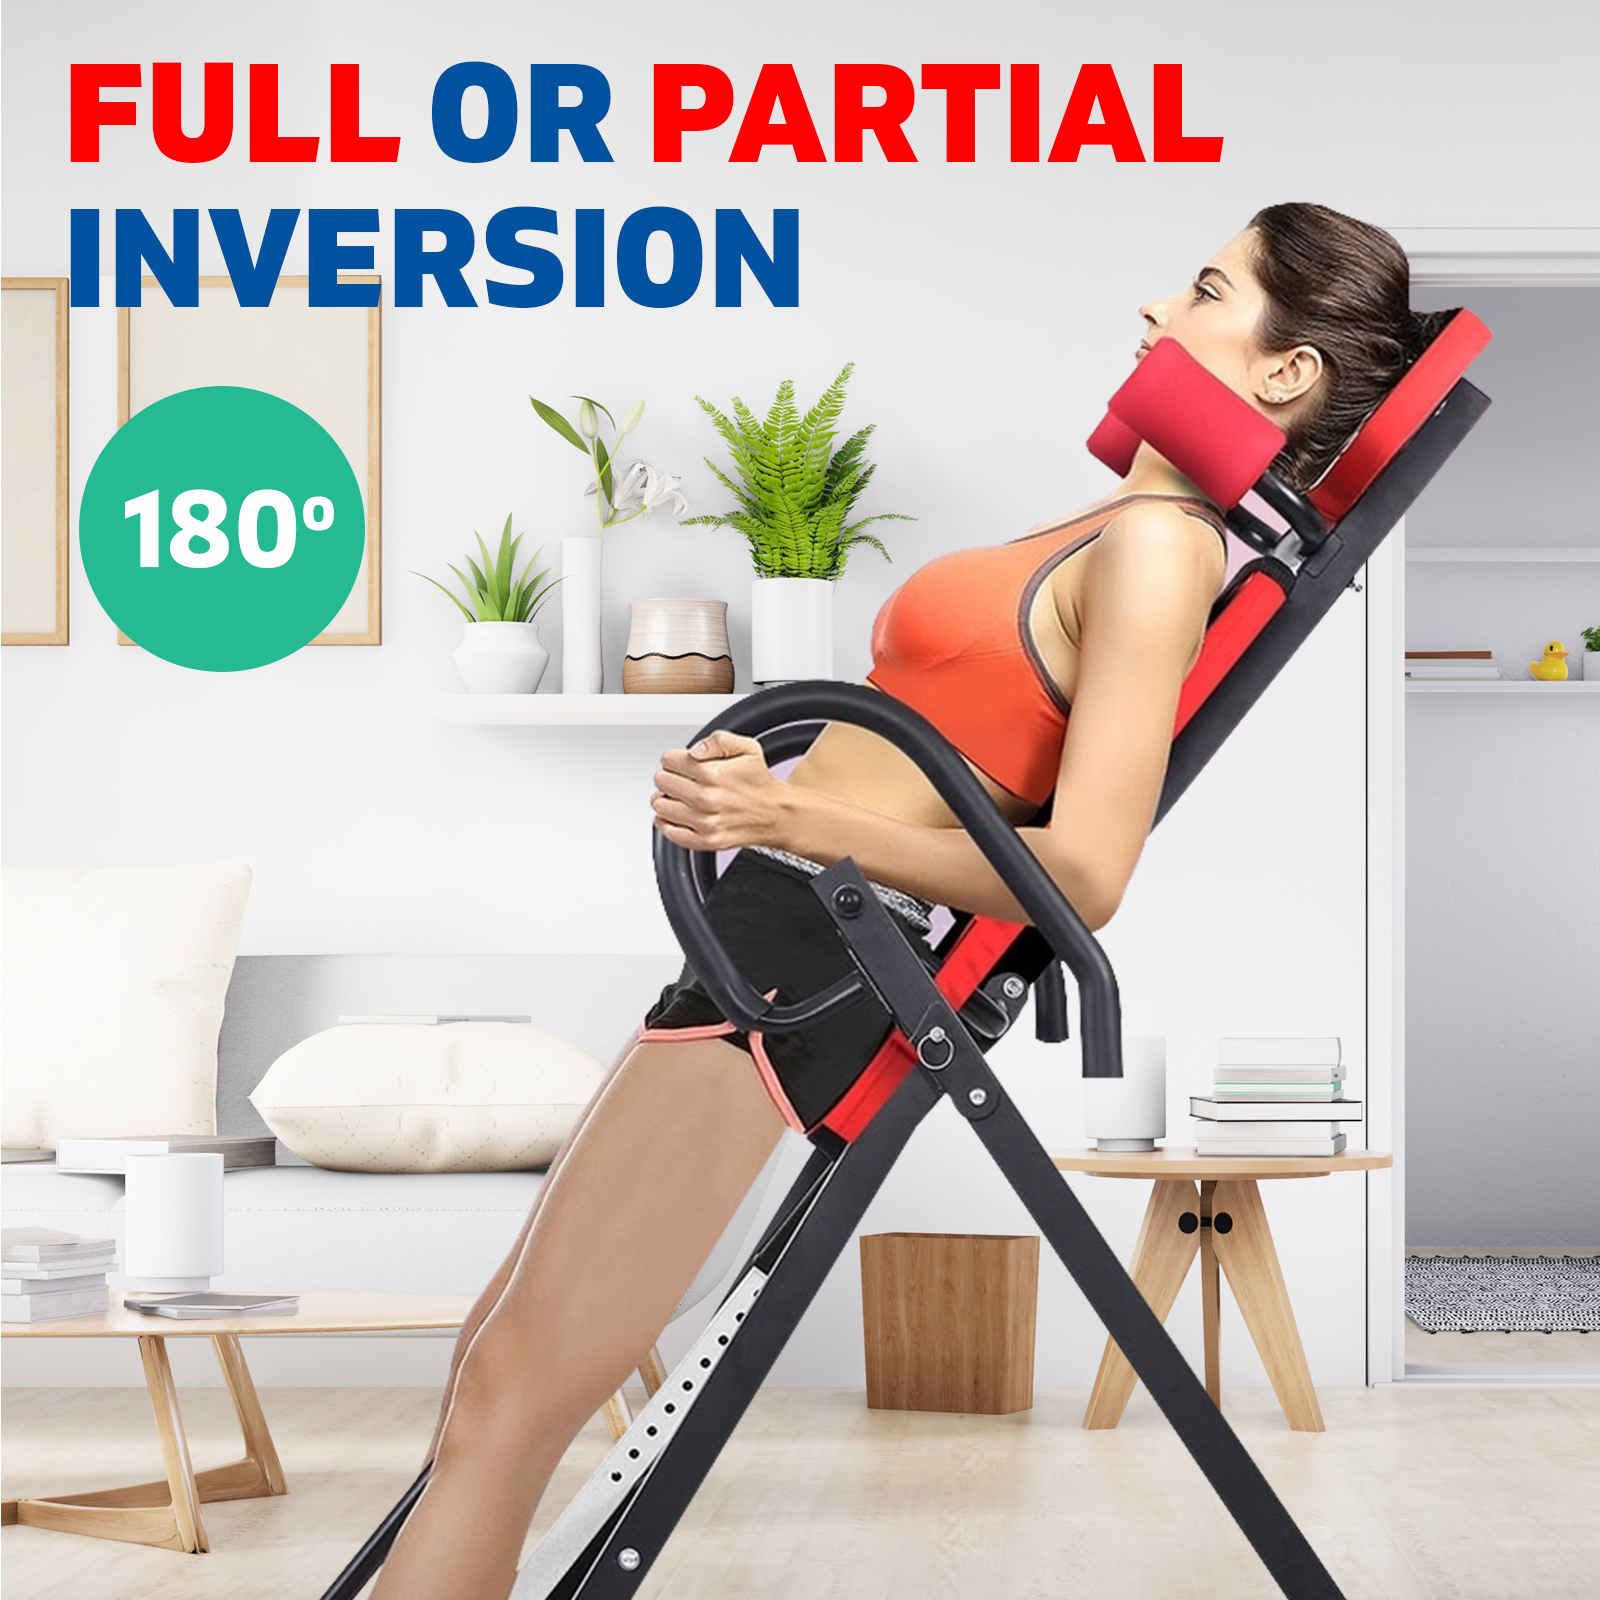 Inversion Table Gravity Stretcher Inverter Foldable Home Fitness Workout Gym